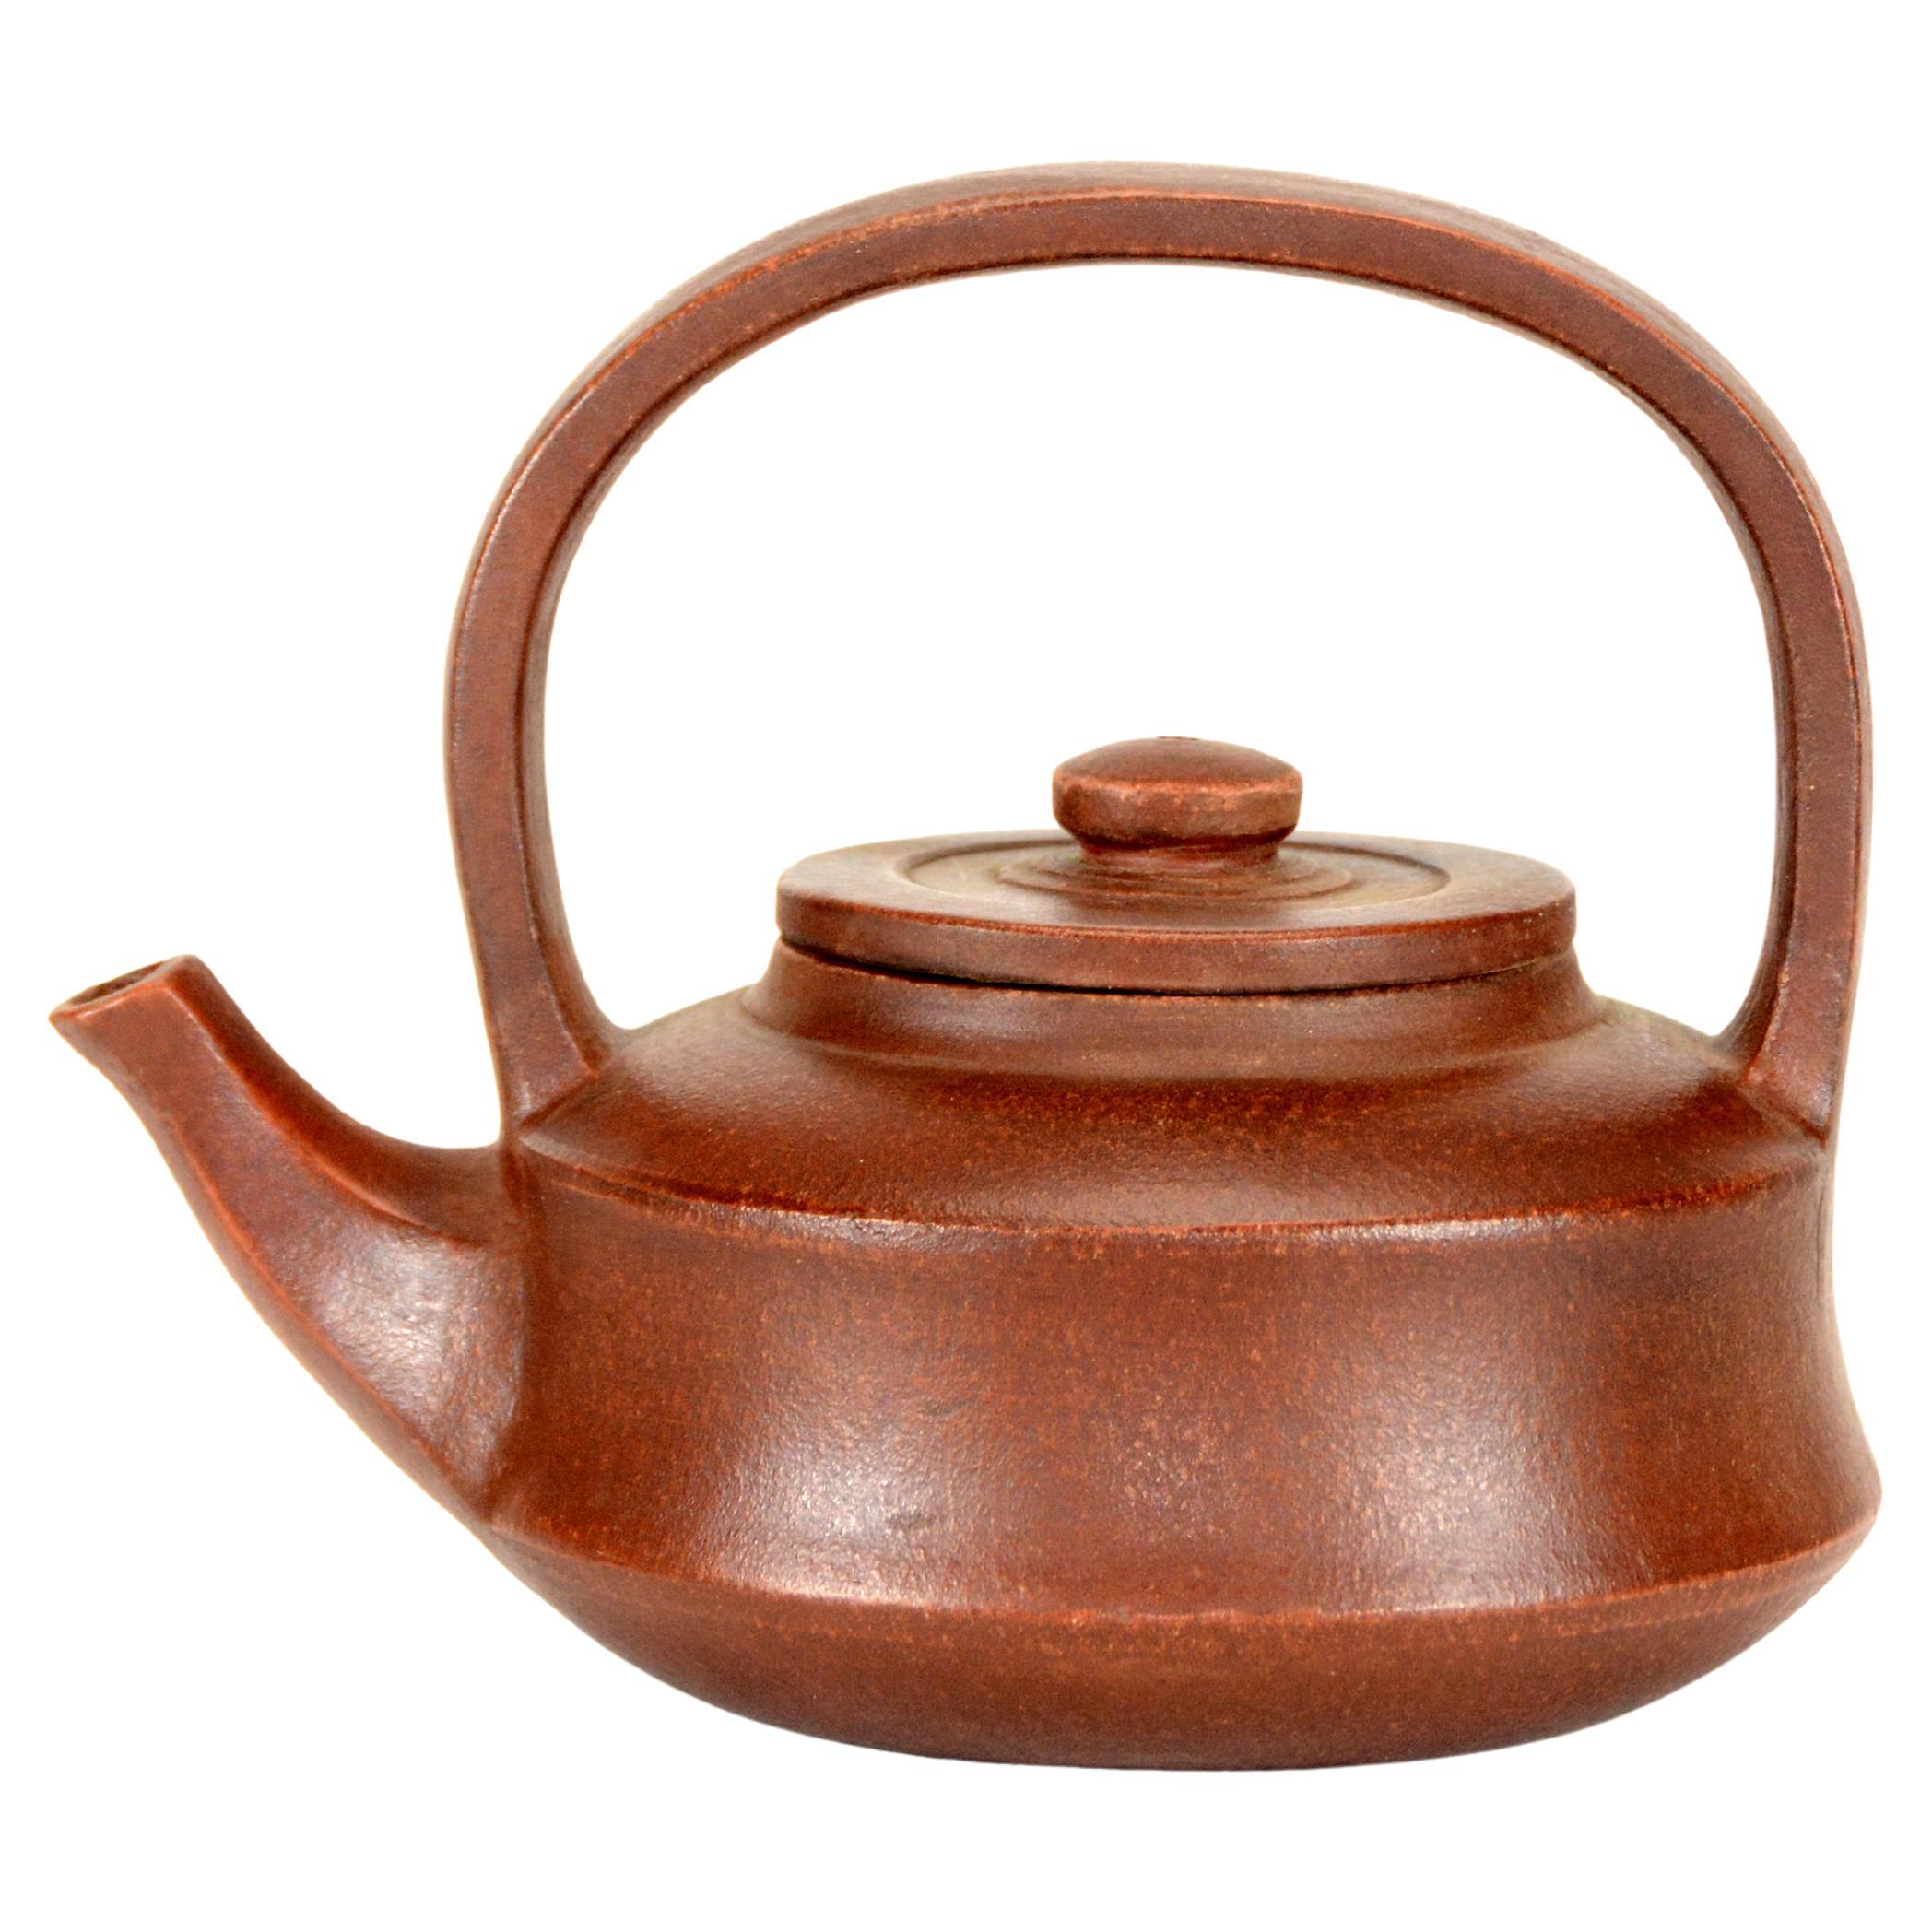 What are Yixing teapots made of?